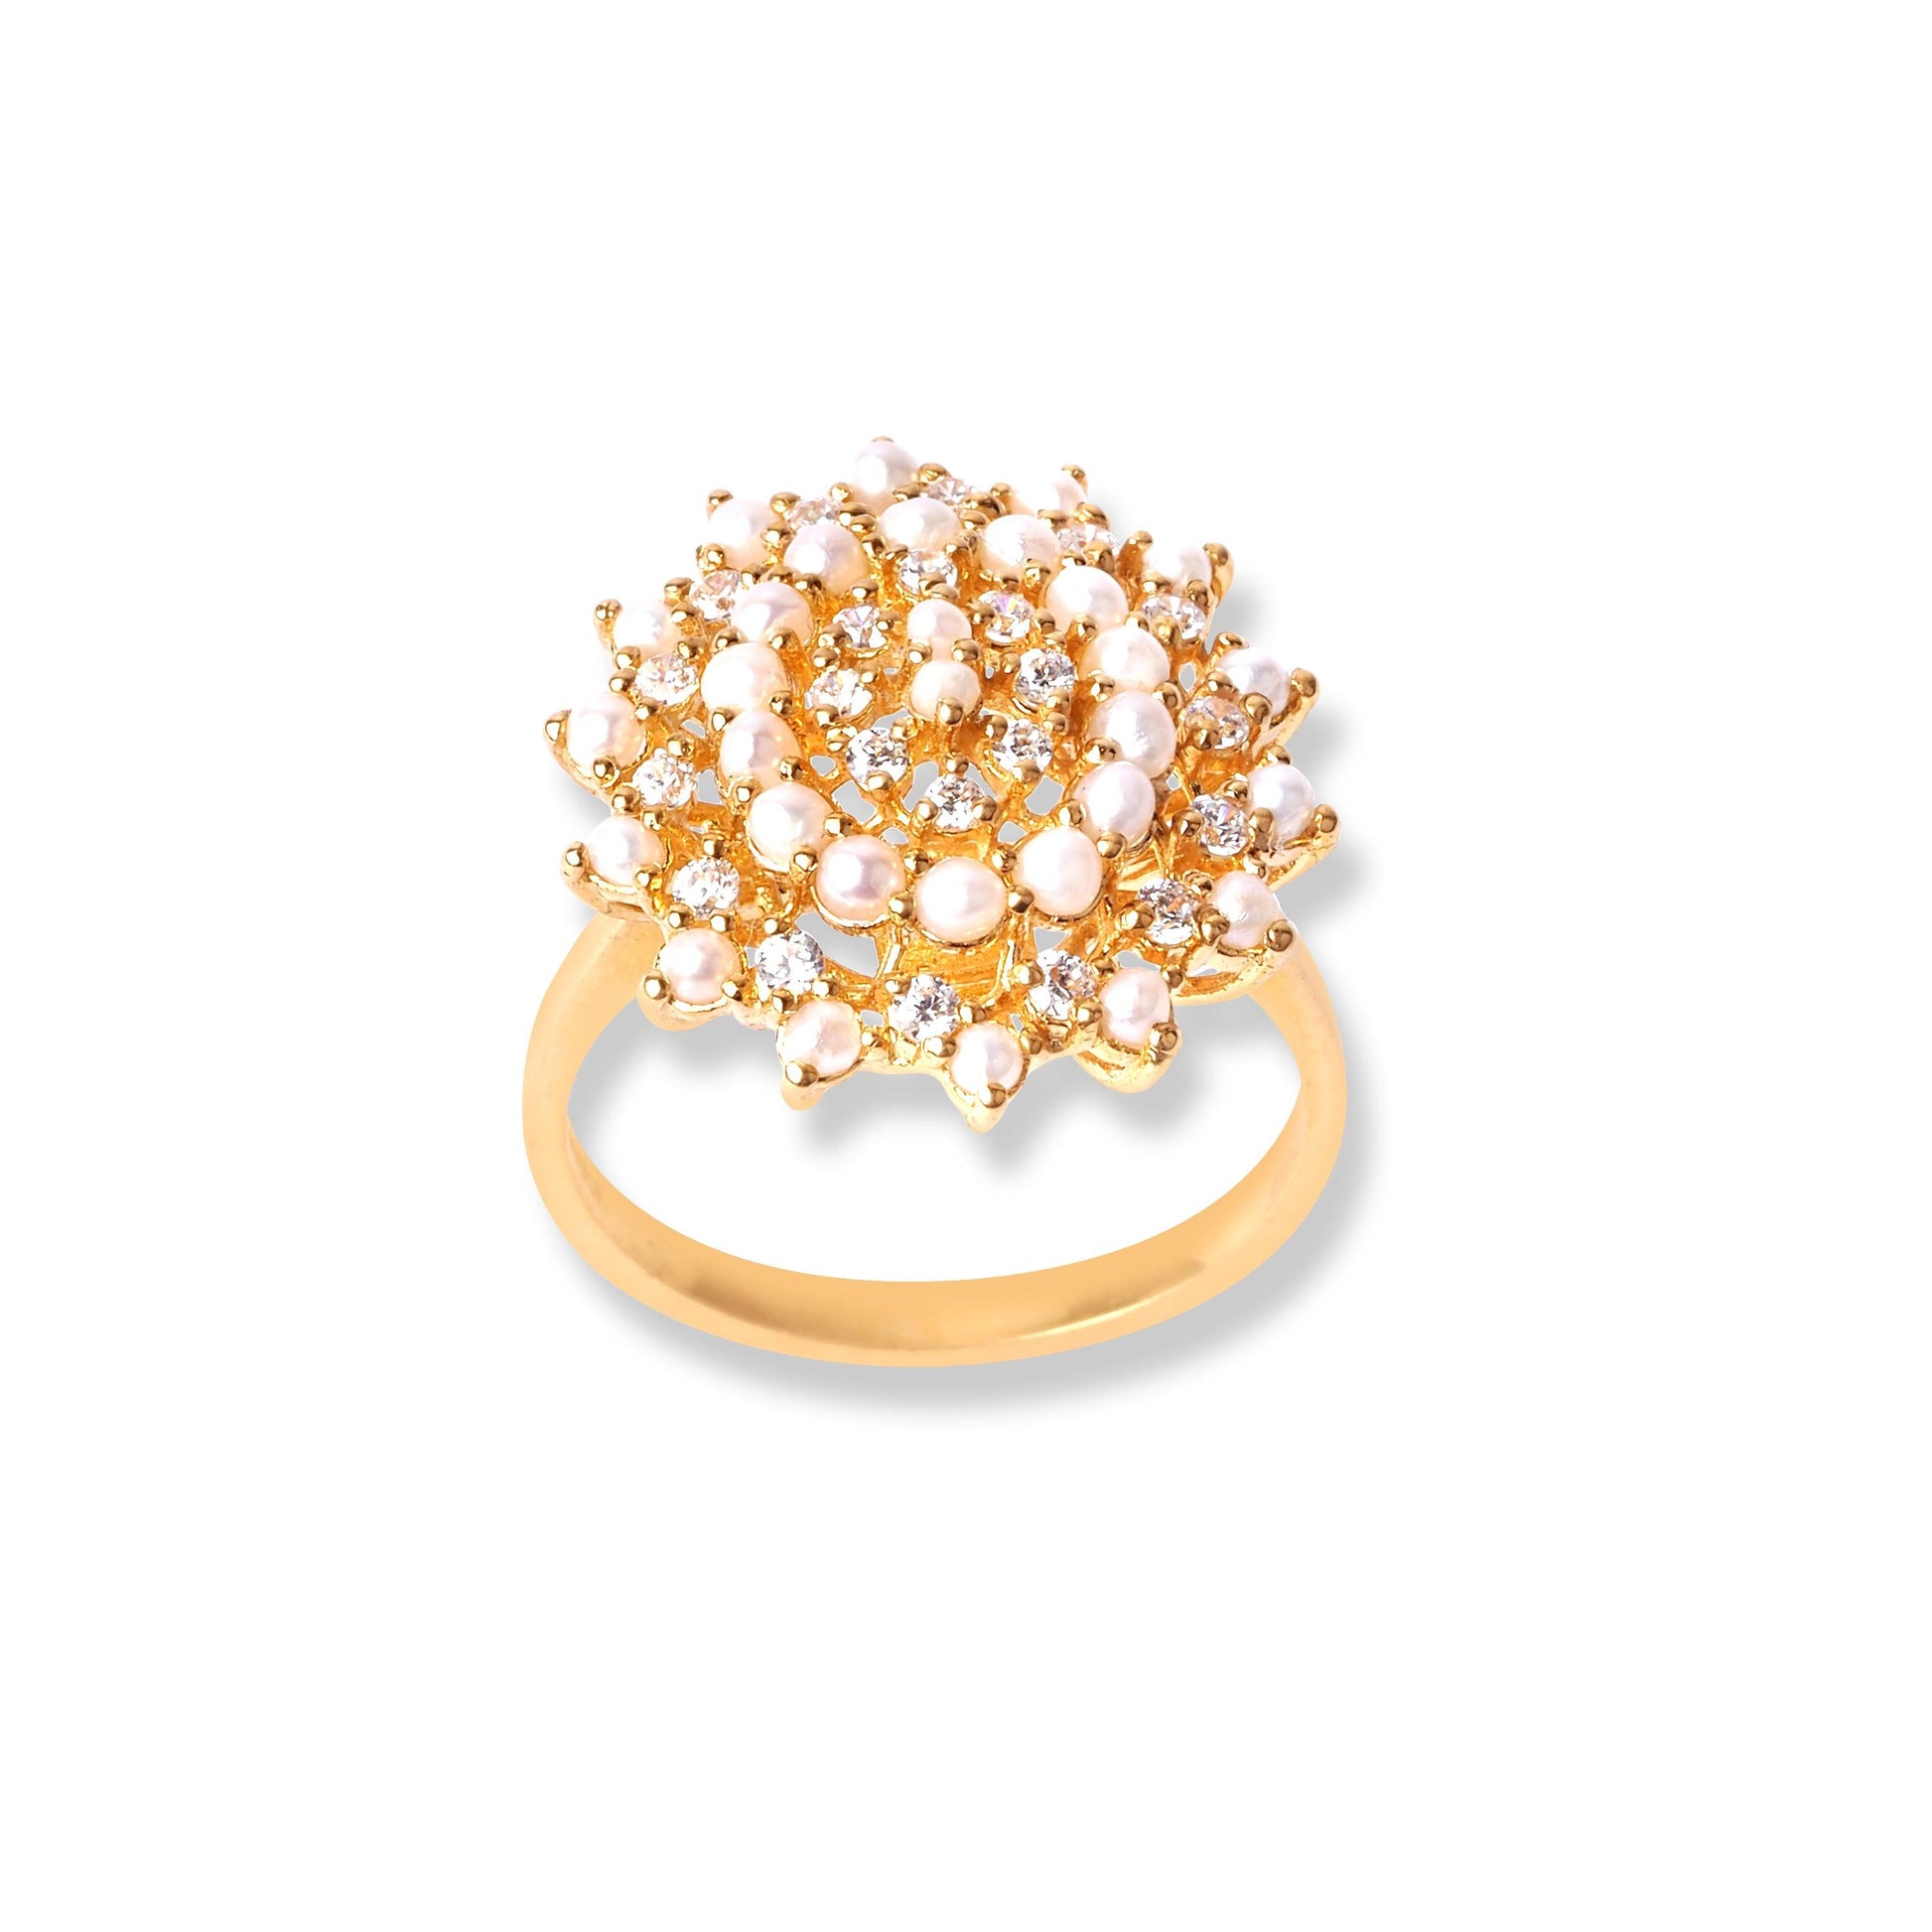 22ct Gold Ring With Cultured Pearl & Cubic Zirconia Stones (4.9g) LR-6593 - Minar Jewellers